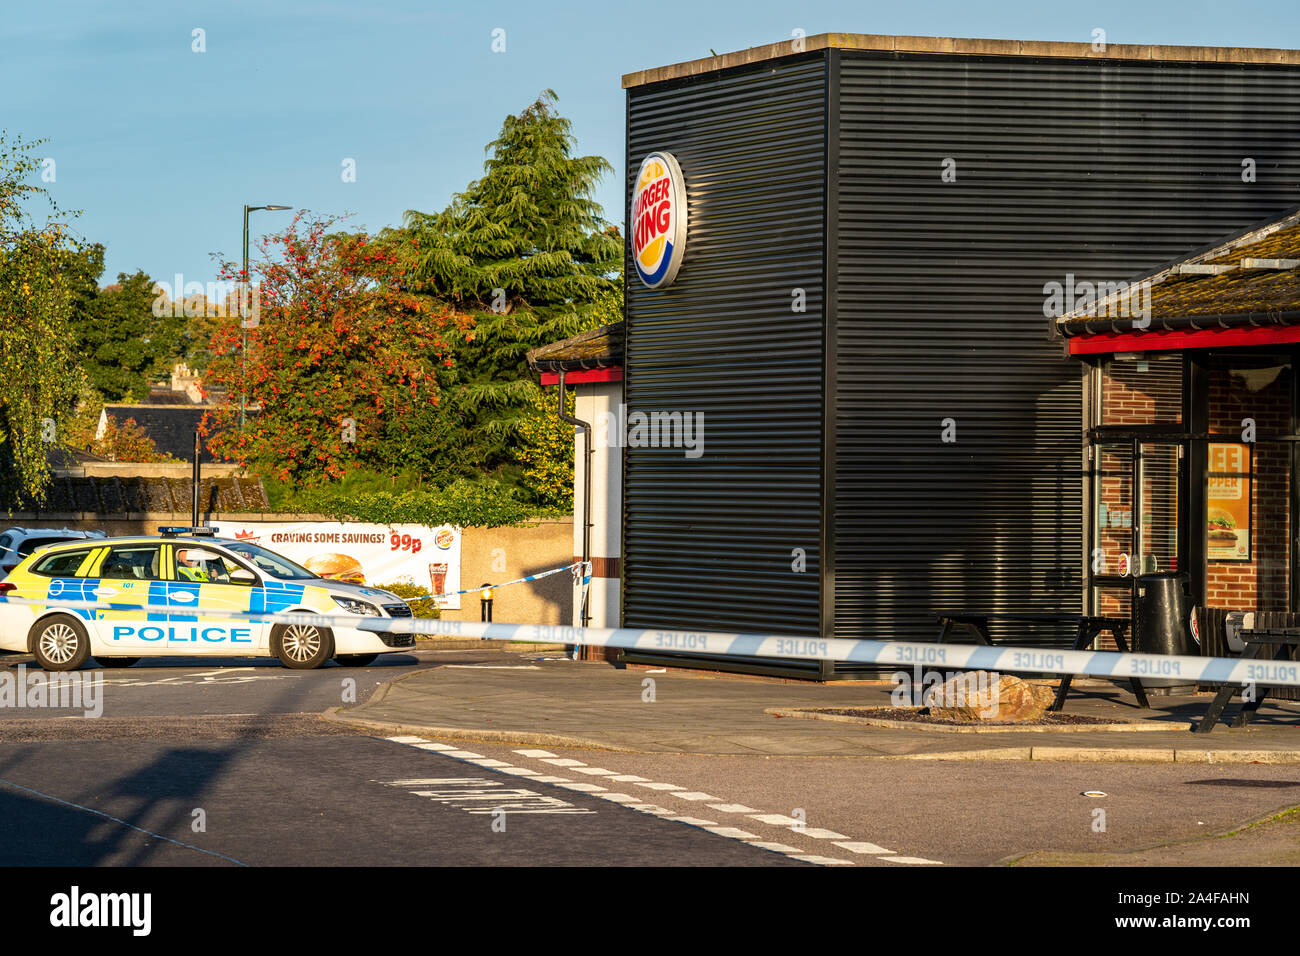 Elgin, Moray, Scotland, UK. 14th Oct, 2019. This is the scene of the Robbery in relation to the following Police PR. Police in Elgin are appealing for information following a robbery at a business premises in the Ashgrove Road area of the town. The incident happened around 11.50pm on Sunday, 13 October, when two men entered Burger King and demanded cash. They then left with a three figure sum which was later recovered. Both men are described as tall, stocky build and are not believed to have had local accents. Credit: JASPERIMAGE/Alamy Live News Stock Photo